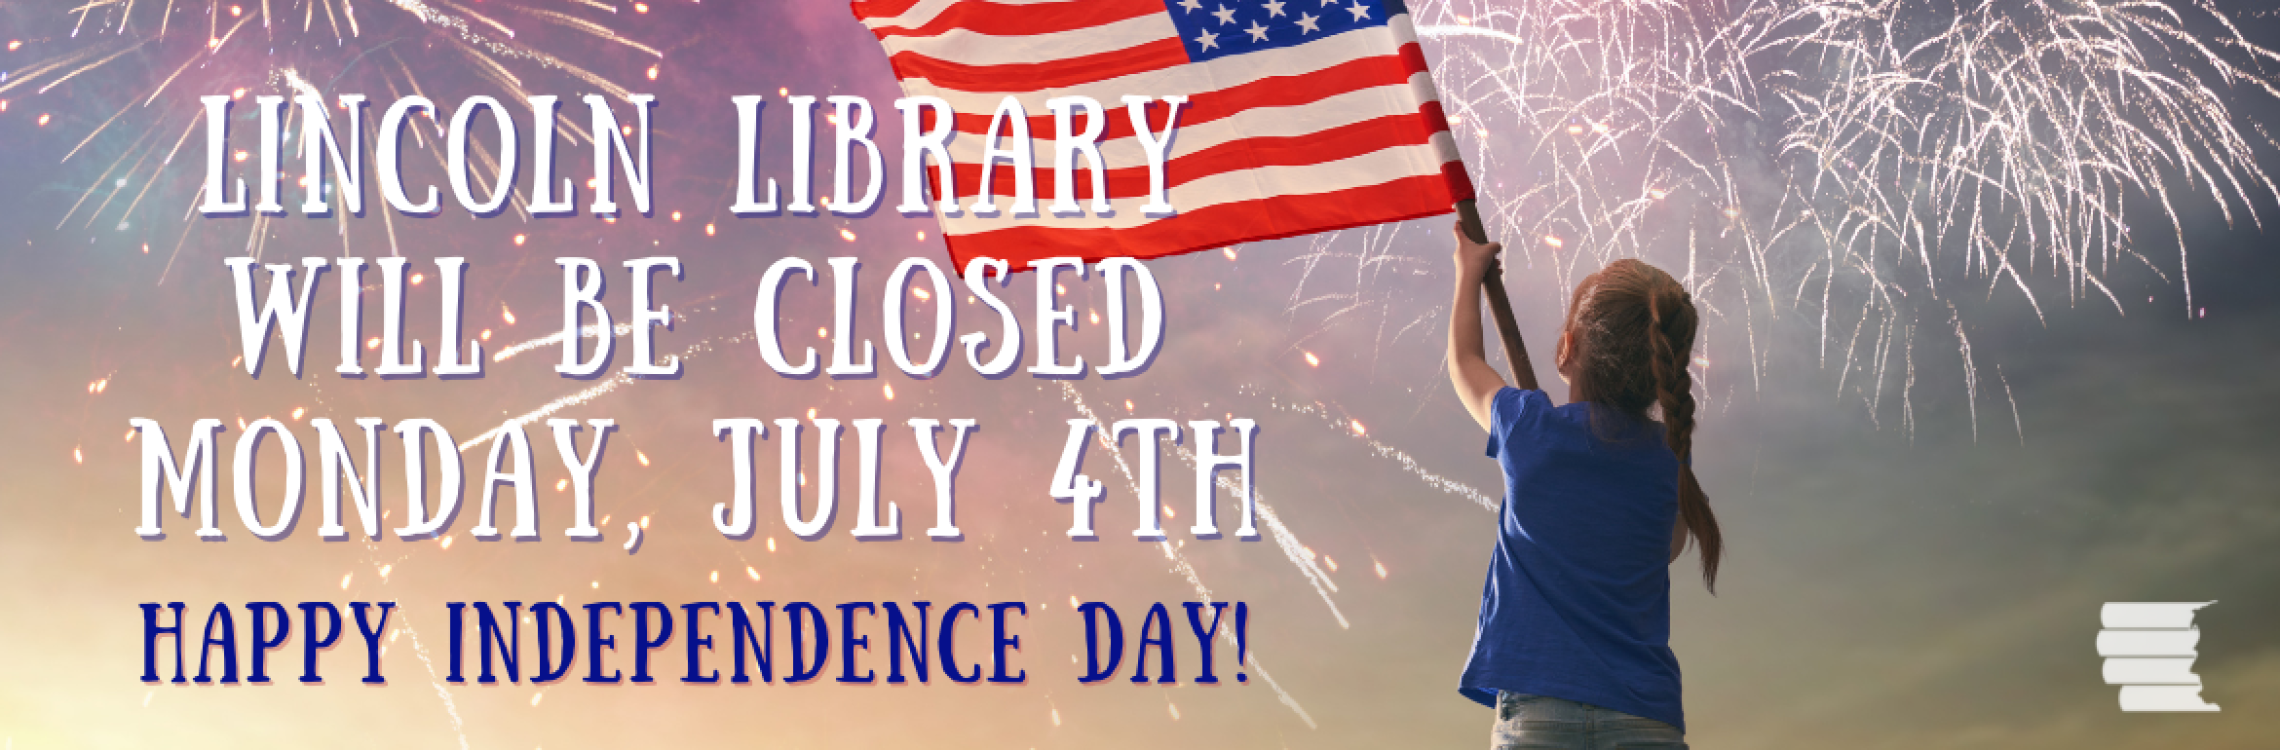 Lincoln Library will be closed Monday, July 4th for Independence Day